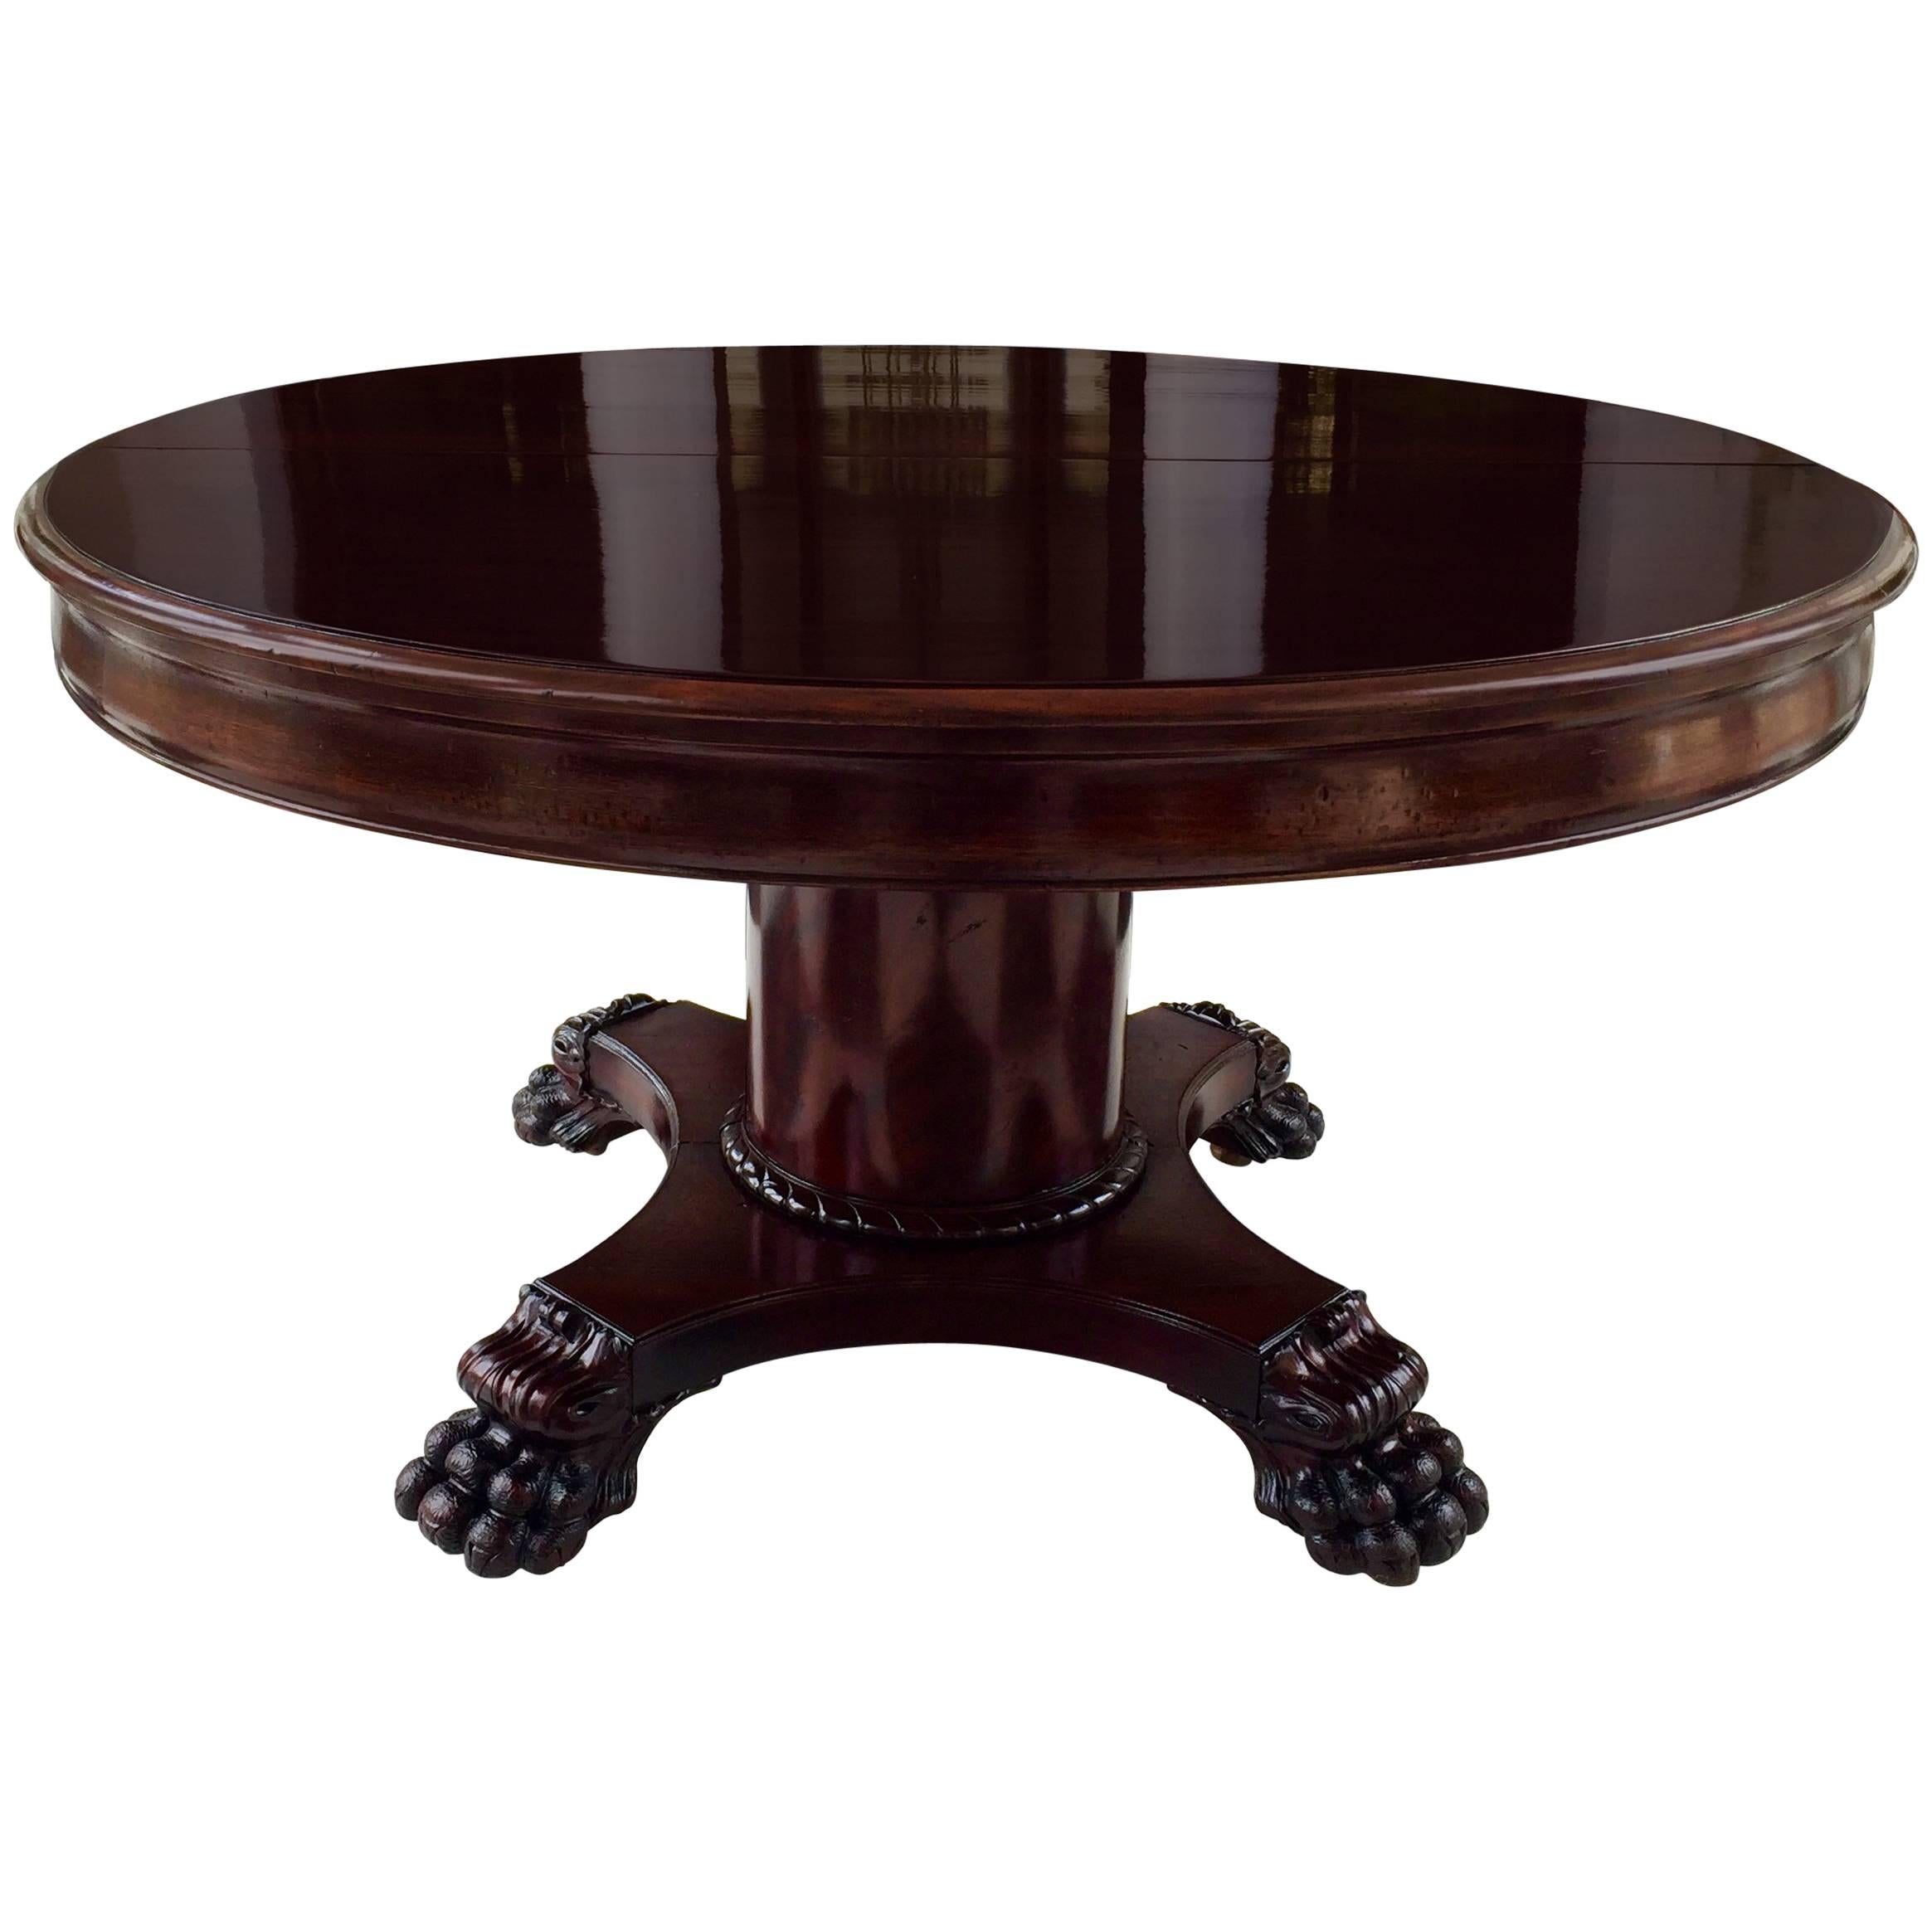 Round Dining Table, 54"Neoclassical solid Mahogany expanding to 12.5' lion claws